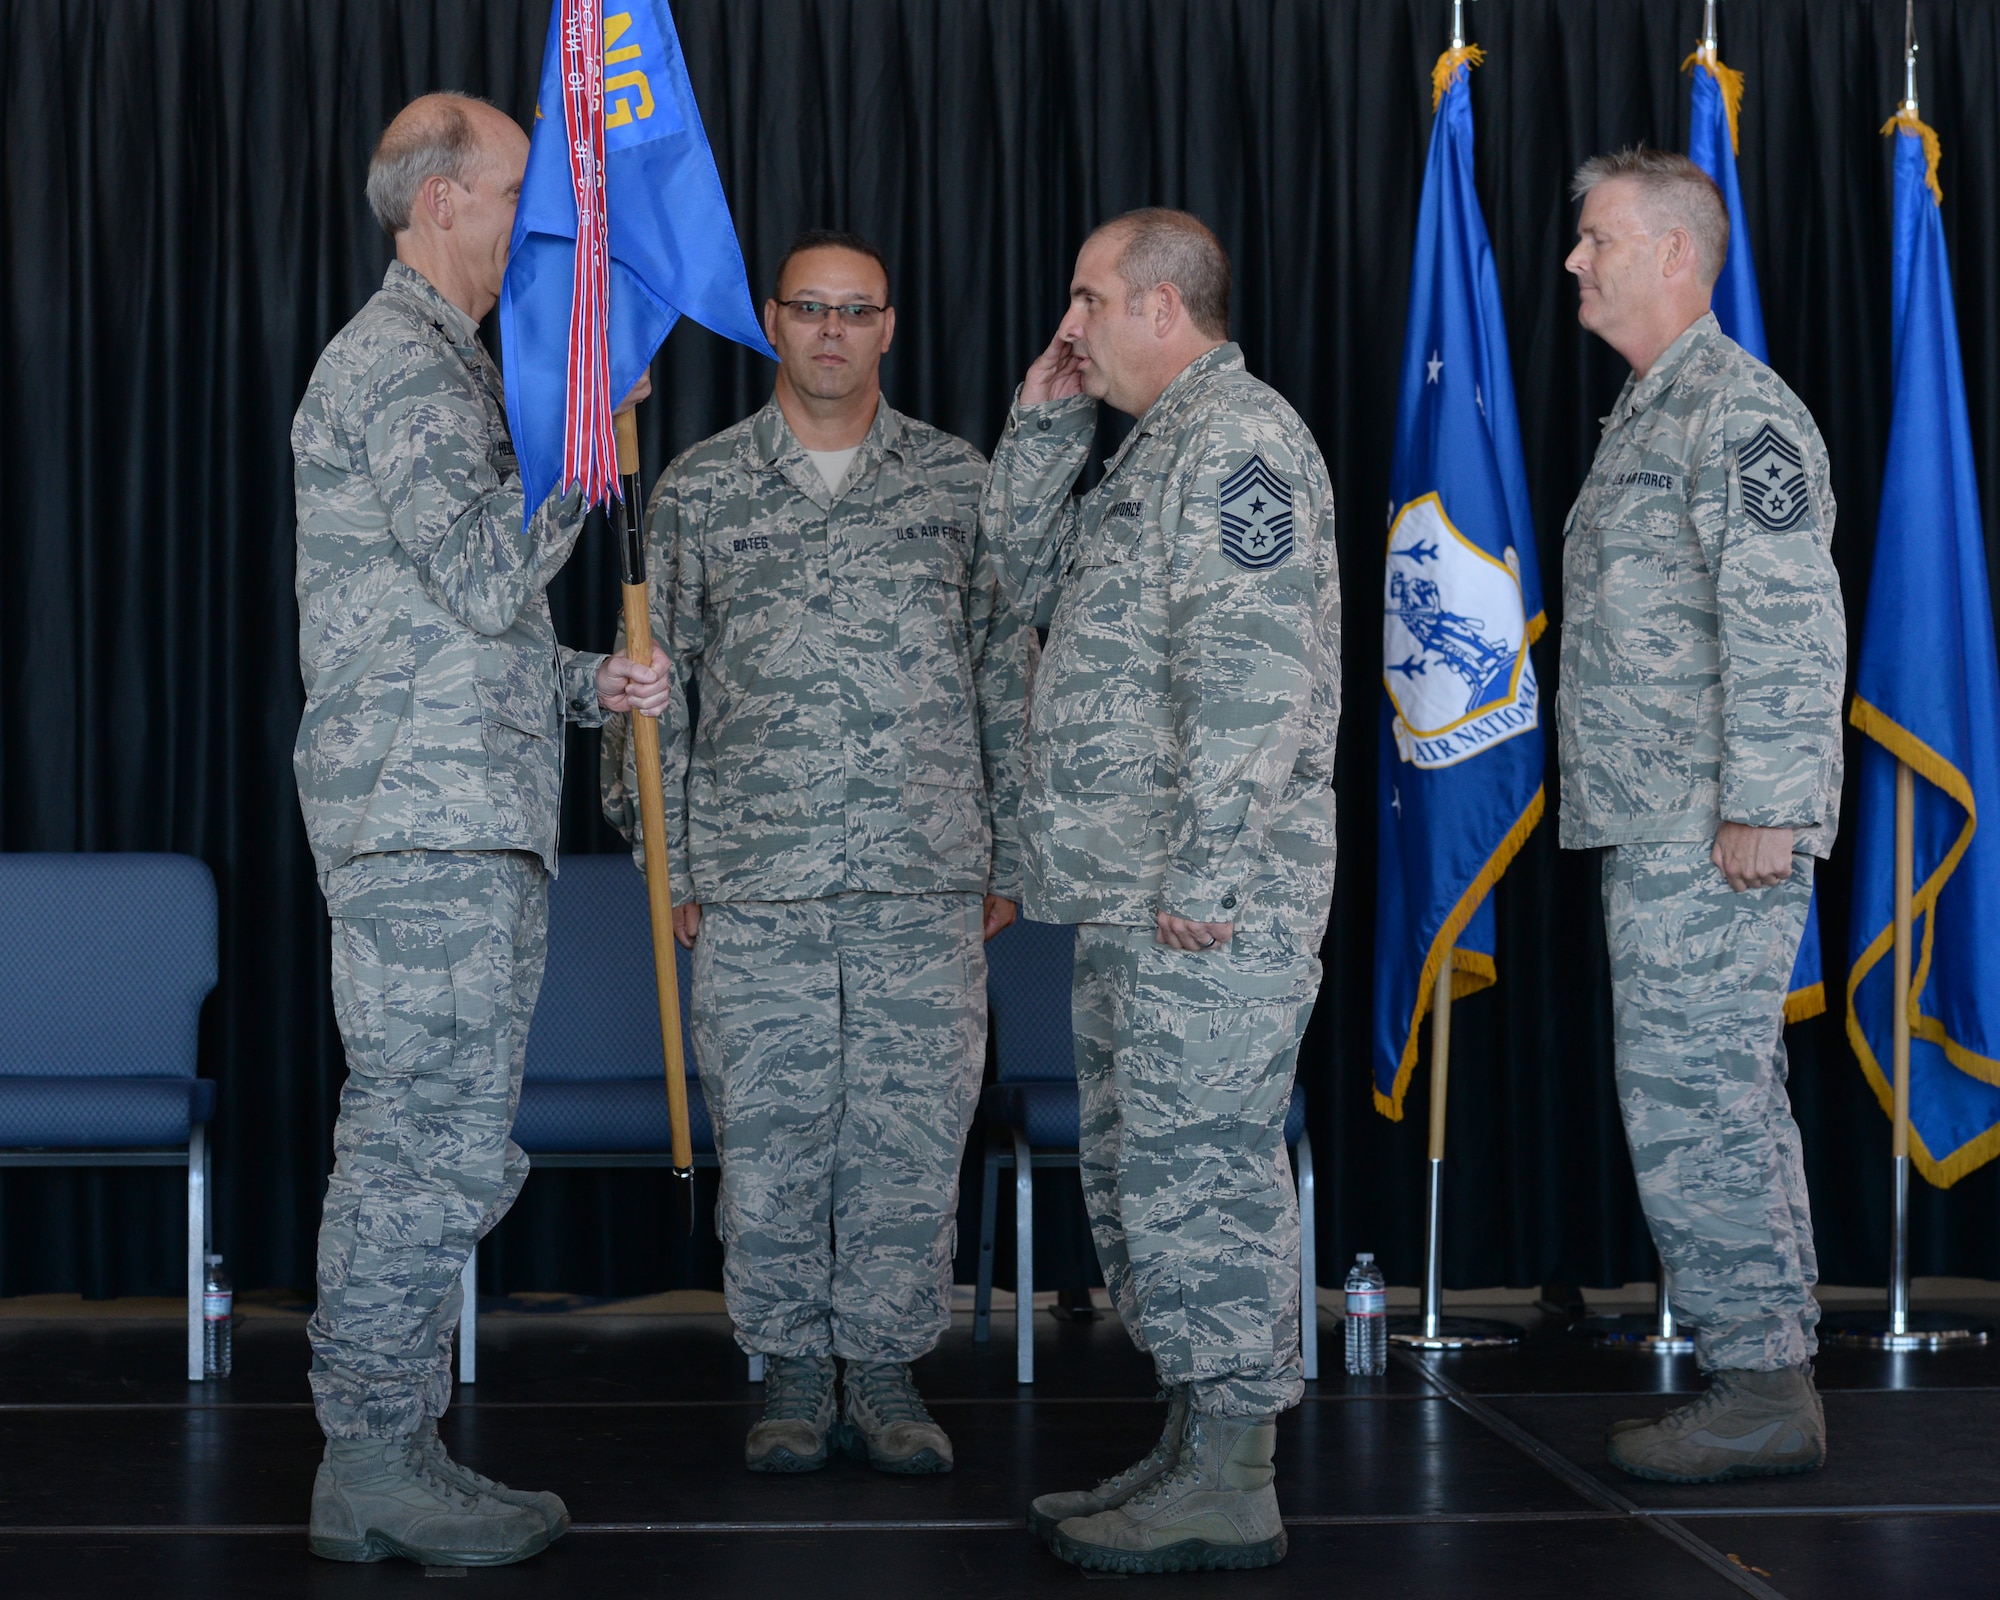 New Hampshire Air National Guard State Command Chief Master Sgt. David Obertanec salutes the N.H. National Guard Adjutant General Maj. Gen. William N. Reddel III during a change of authority ceremony at Pease Air National Guard Base, N.H., Aug. 9, 2015.  During the ceremony Chief Master Sgt. Matthew Collier relinquished authority to the Chief Master Sergeant David Obertanec. (U.S. Air National Guard photo by Staff Sgt. Curtis J. Lenz)